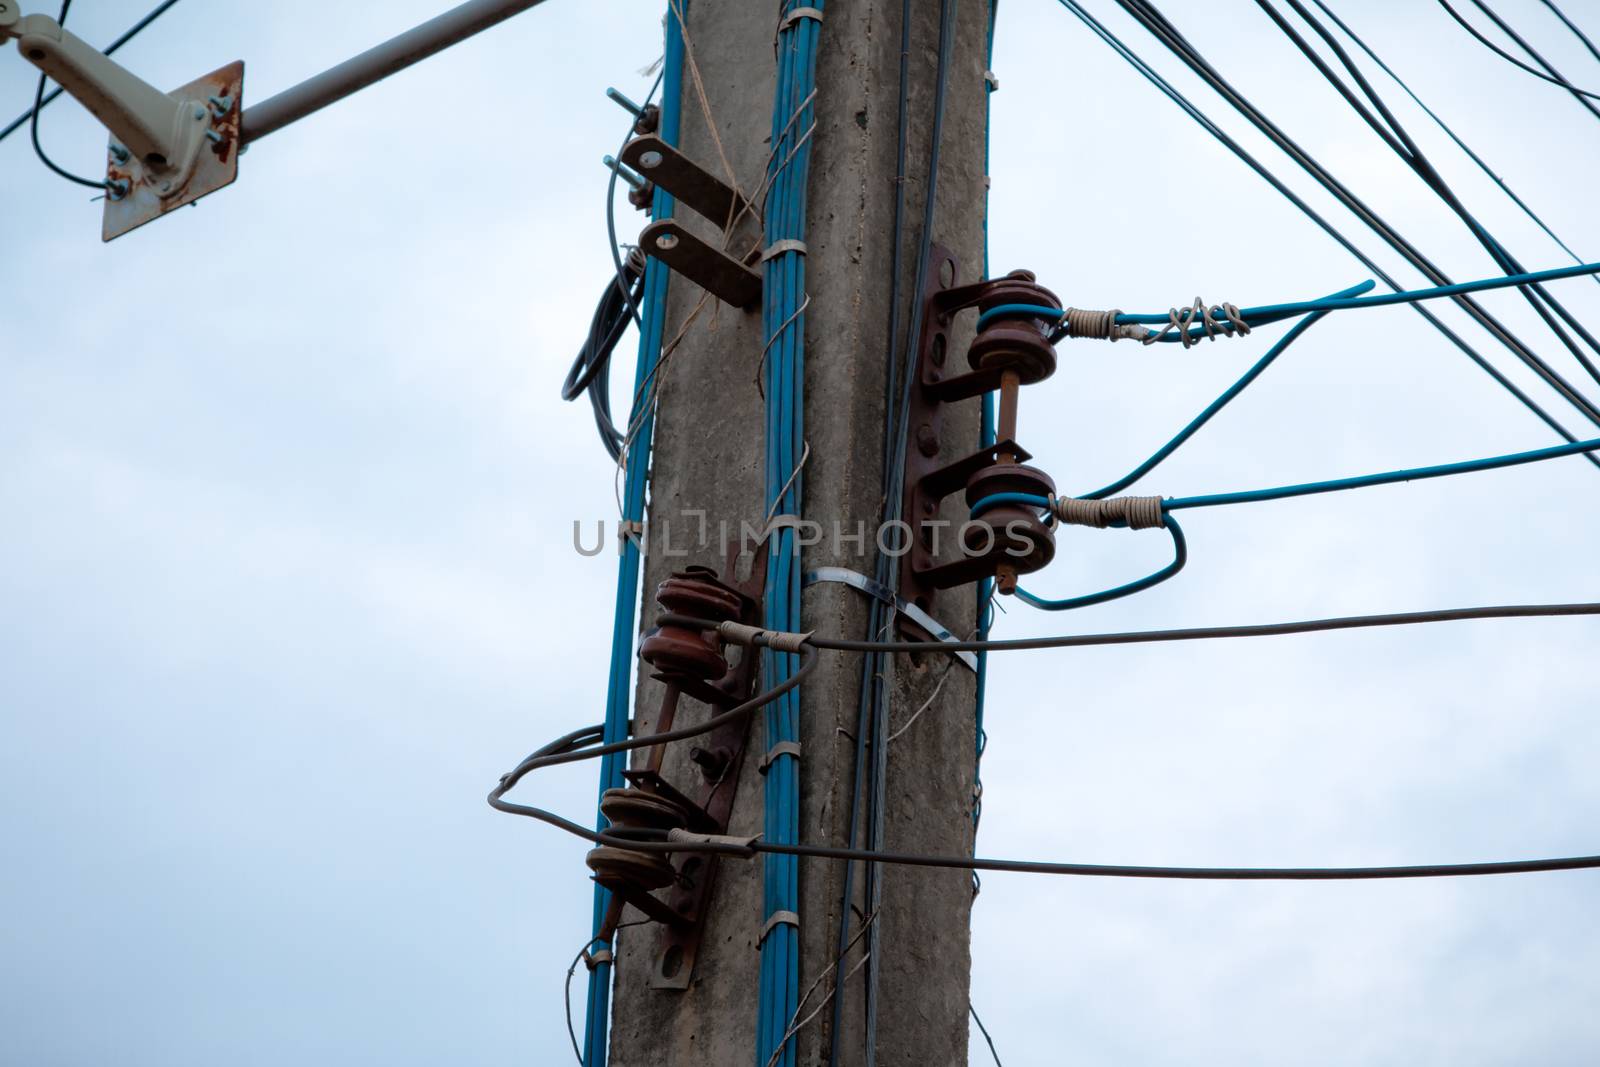 complicated arrangement of Thailand electric wire by N_u_T